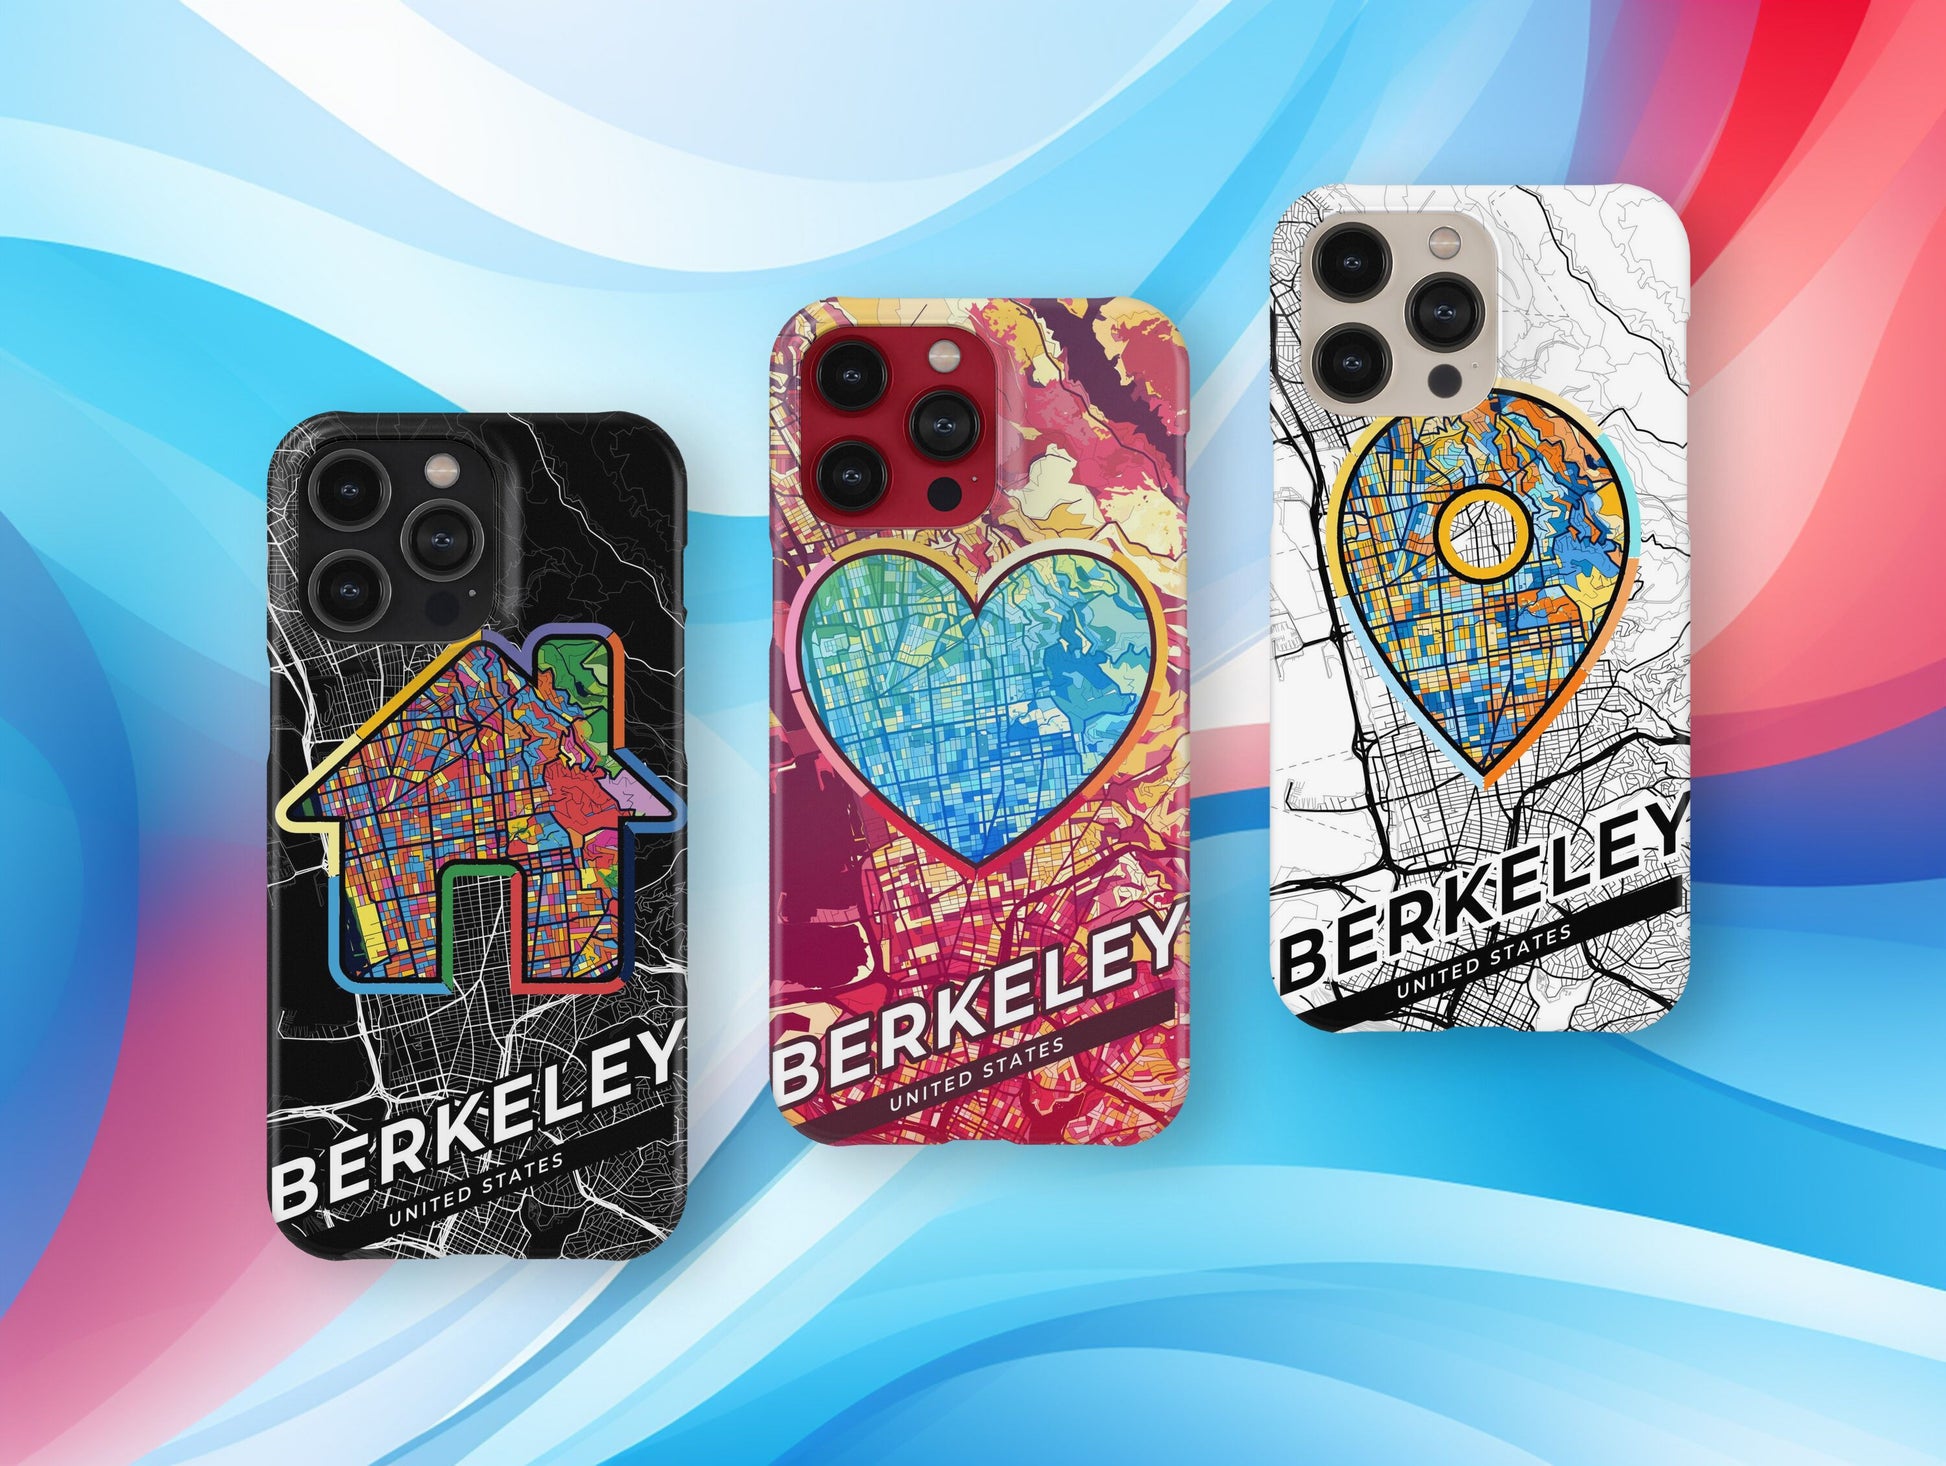 Berkeley California slim phone case with colorful icon. Birthday, wedding or housewarming gift. Couple match cases.